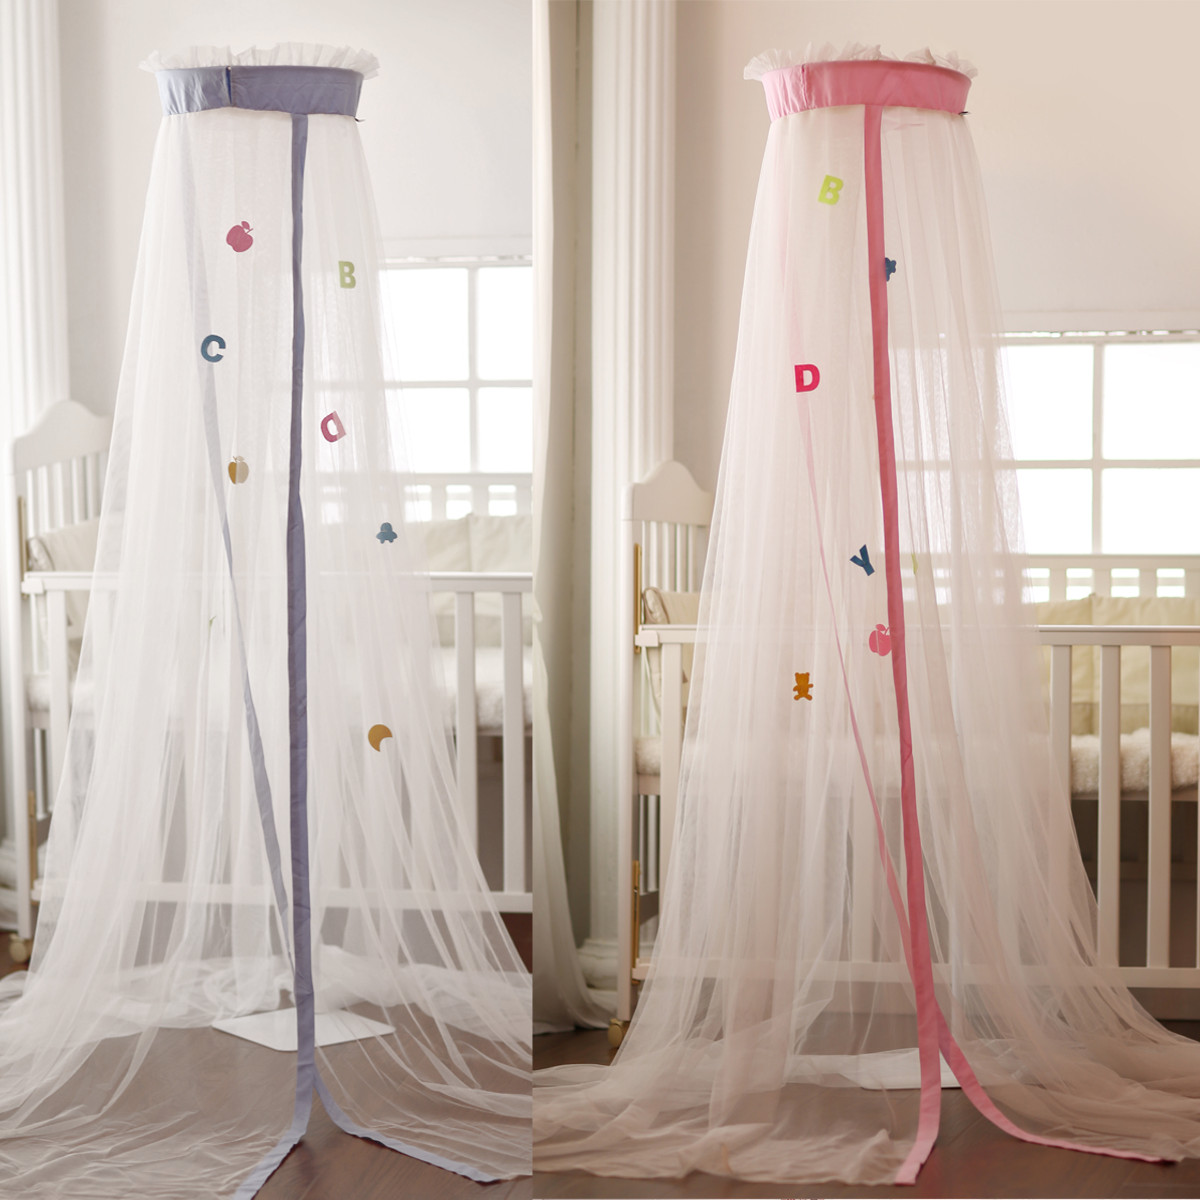 Mosquito-Net-Children-Bed-Curtain-Dome-Cot-Netting-Drape-Stand-Insect-Protection-1818006-1